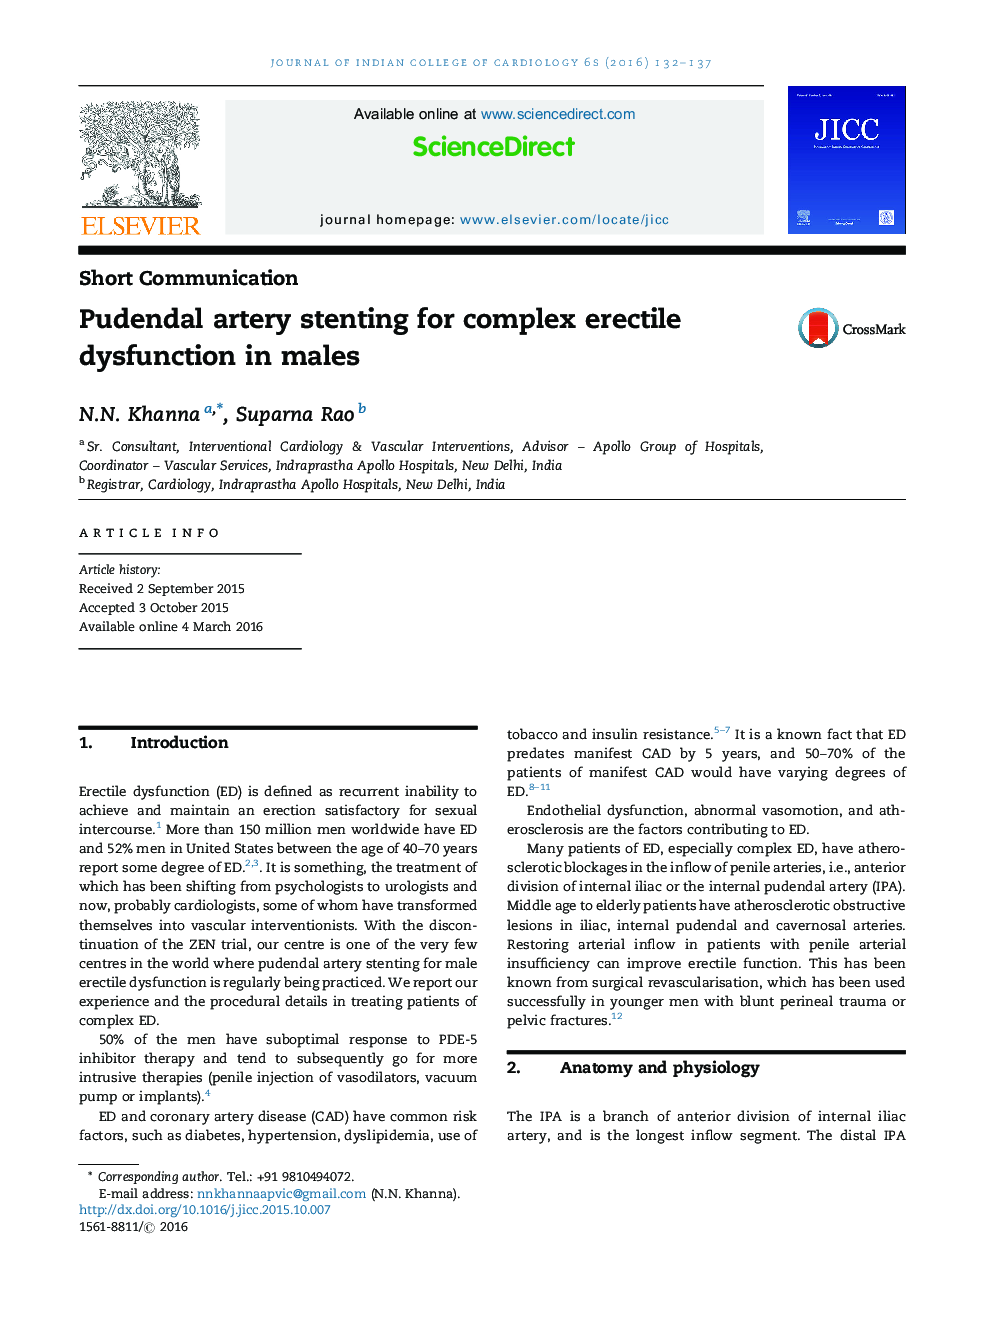 Pudendal artery stenting for complex erectile dysfunction in males